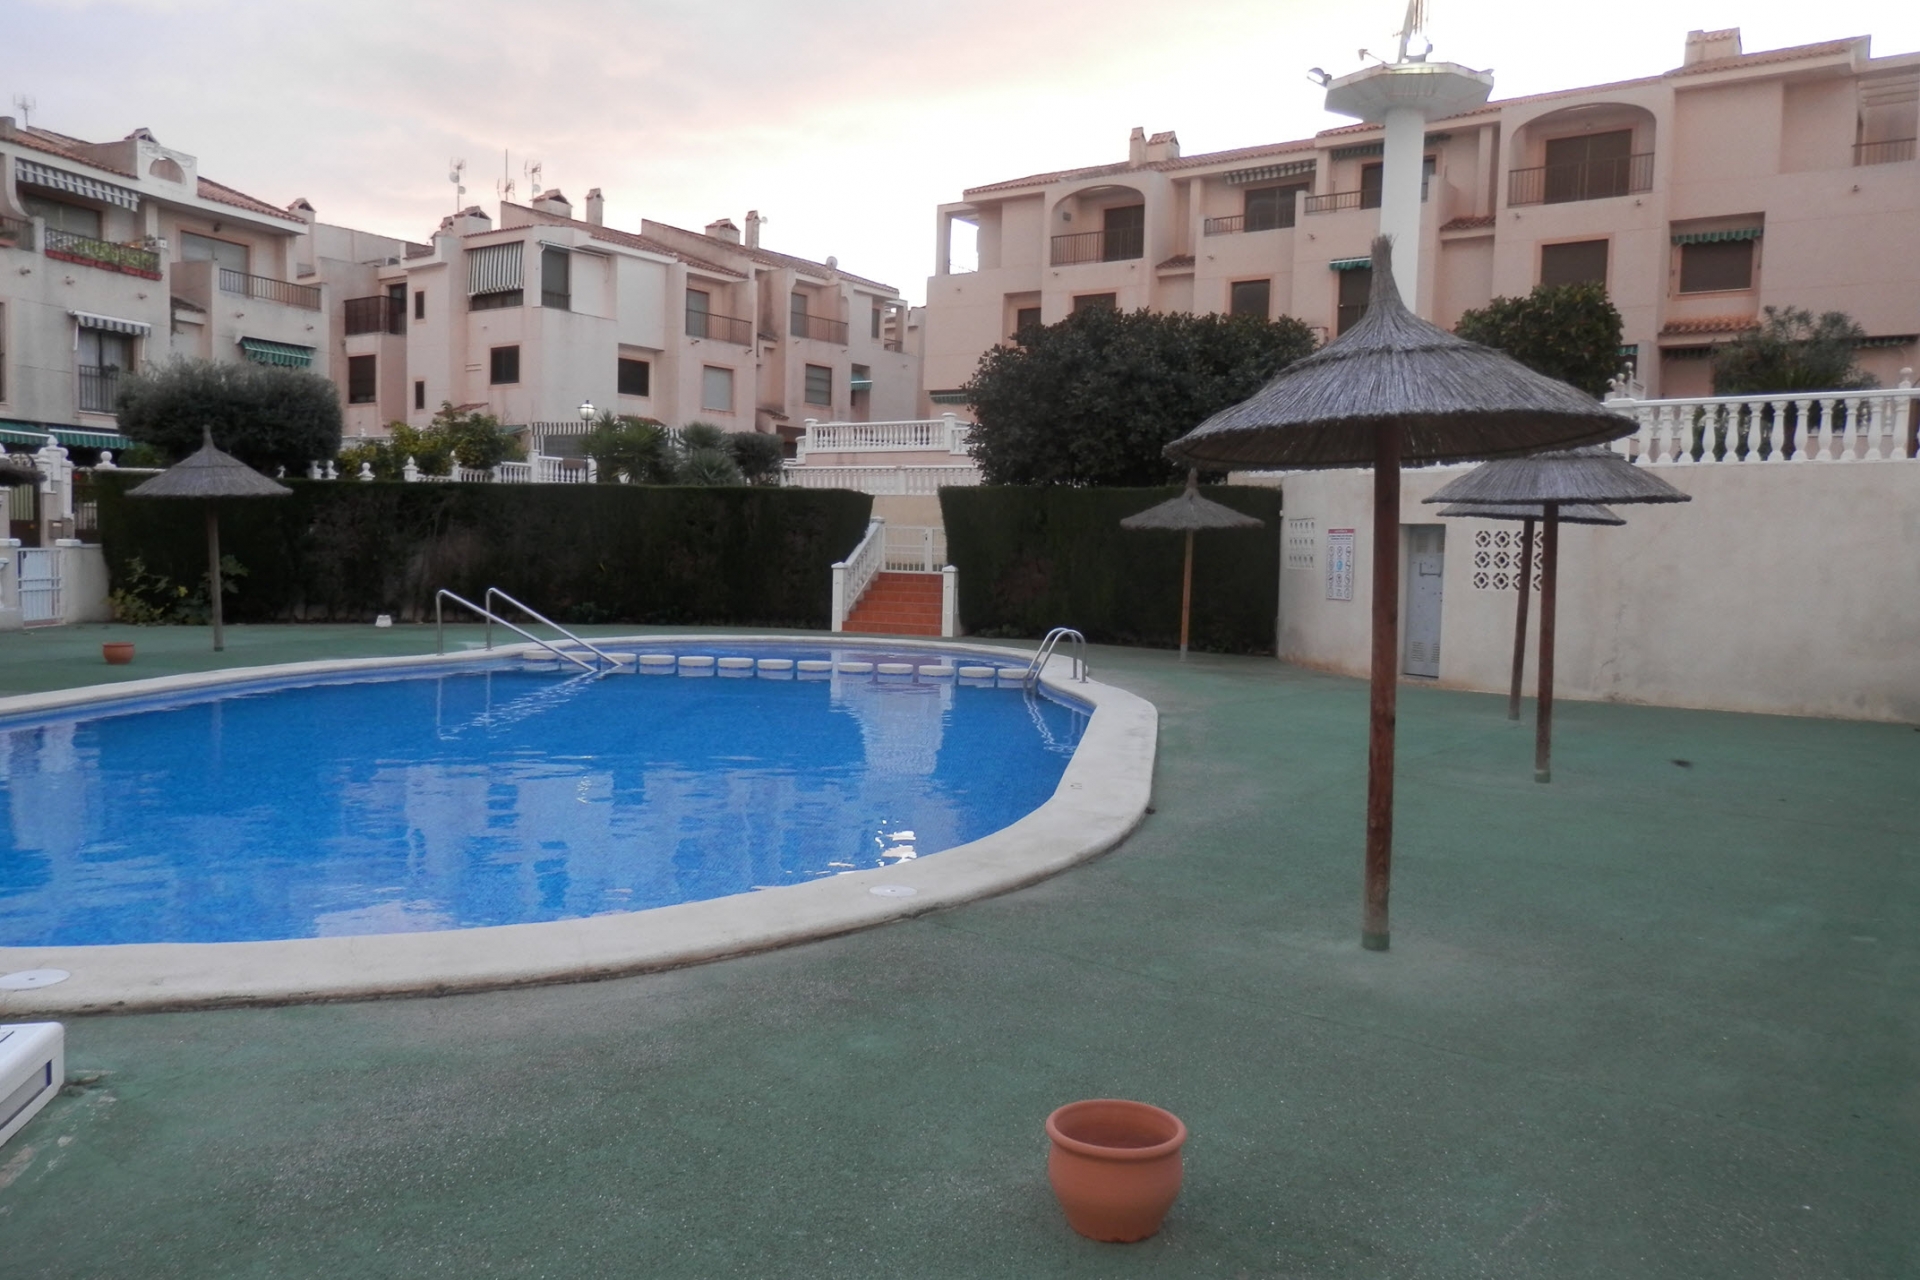 Archived - Townhouse for sale - Guardamar del Segura - Guardamar del Segura - Town Centre